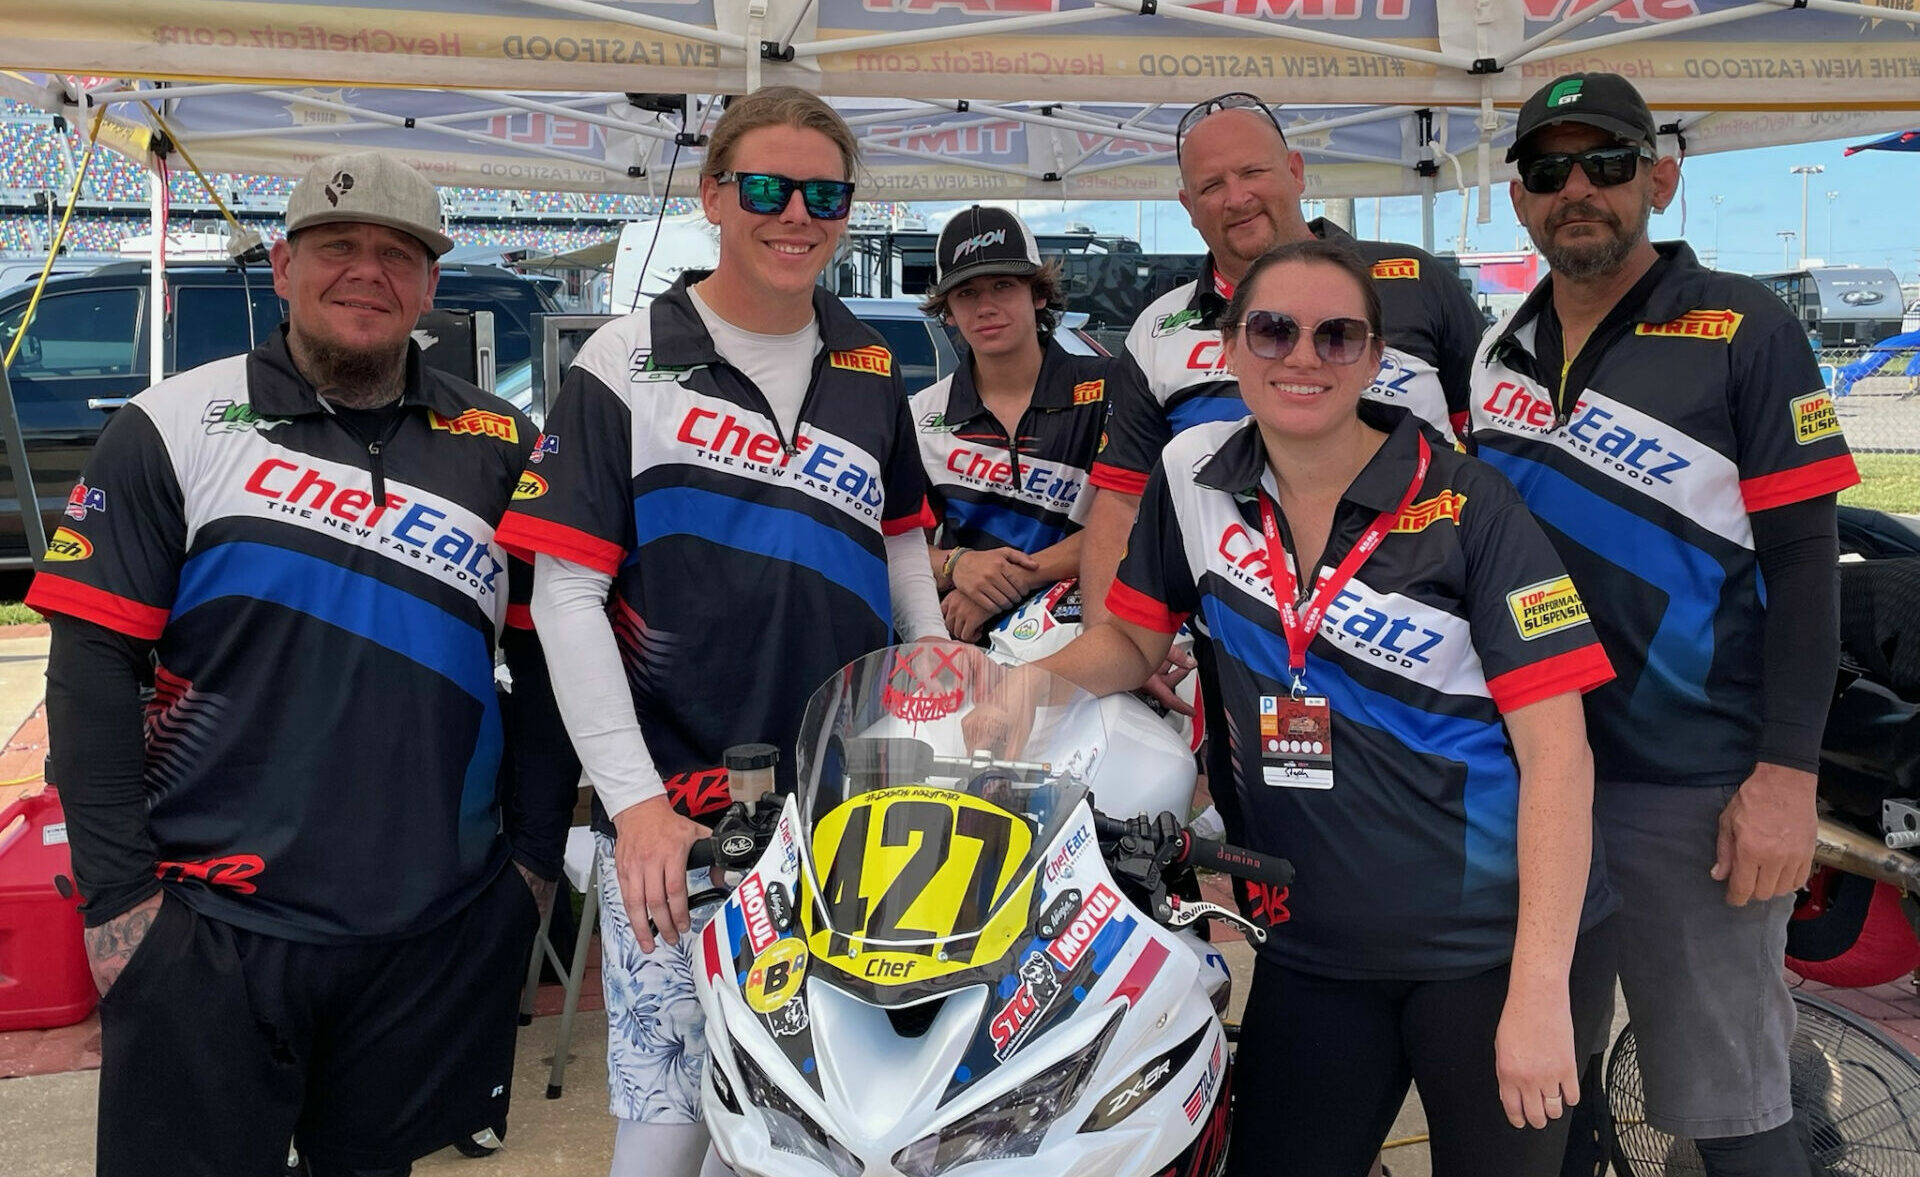 The Chef Eatz race team and ownership (from left): crew chief Kevin Chadwick, rider and team/company co-owner Jeff Servin, rider Carter Chadwick, crew member Steve Shannon, team/company co-owner Stephanie Servin, and lead mechanic Vinny Minelli. Photo courtesy Chef Eatz.